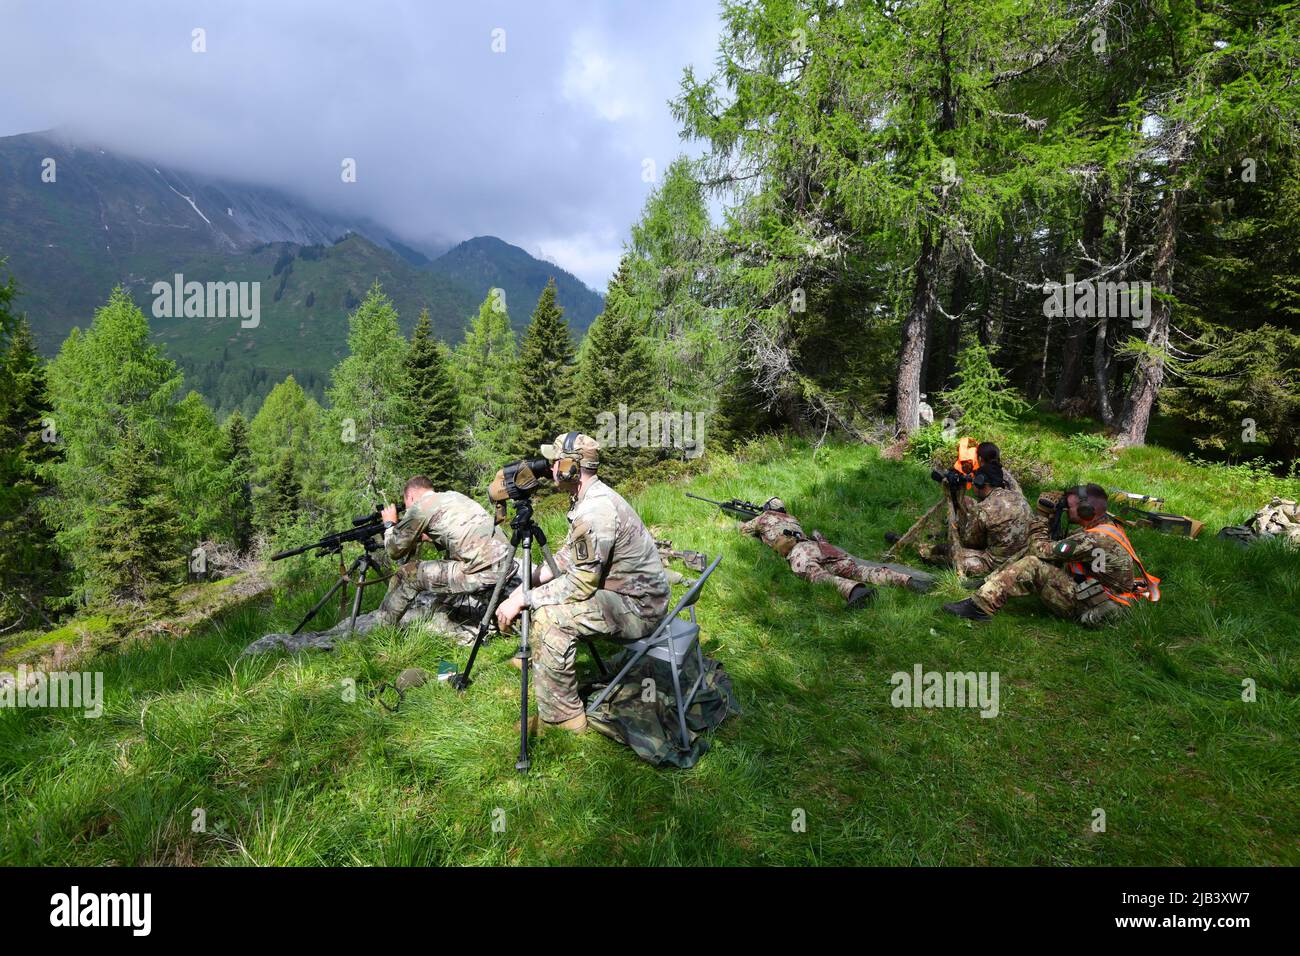 U.S. Army paratroopers assigned to 1st Squadron, 91st Cavalry Regiment, 173rd Airborne Brigade, engage targets with M110 Semi-Automatic Sniper System during a live-fire exercise as part of Exercise Frozen Dart 22 at Monte Bivera Range in Casera Razzo, Italy, June 01, 2022. Exercise Frozen Dart 22 is a bilateral training exercise between 173rd Airborne Brigade and Italian Army 5th Alpine Regiment Vipiteno, 'Julia' Alpine Brigade. The 173rd Airborne Brigade is the U.S. Army's Contingency Response Force in Europe, providing rapidly deployable forces to the United States European, African, and Cen Stock Photo